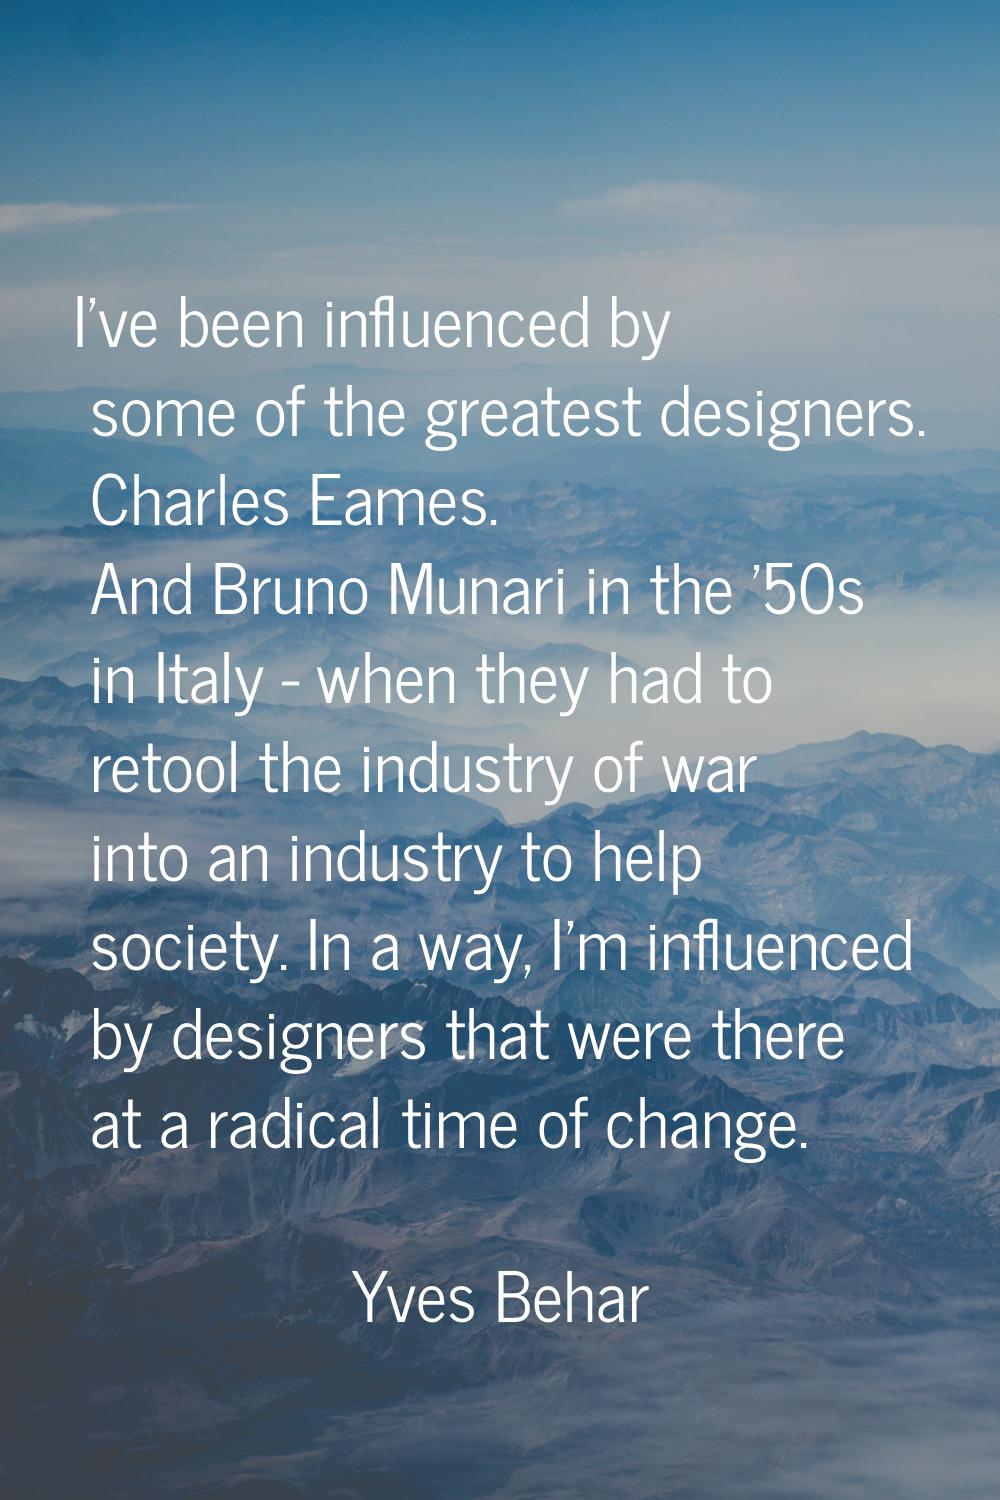 I've been influenced by some of the greatest designers. Charles Eames. And Bruno Munari in the '50s